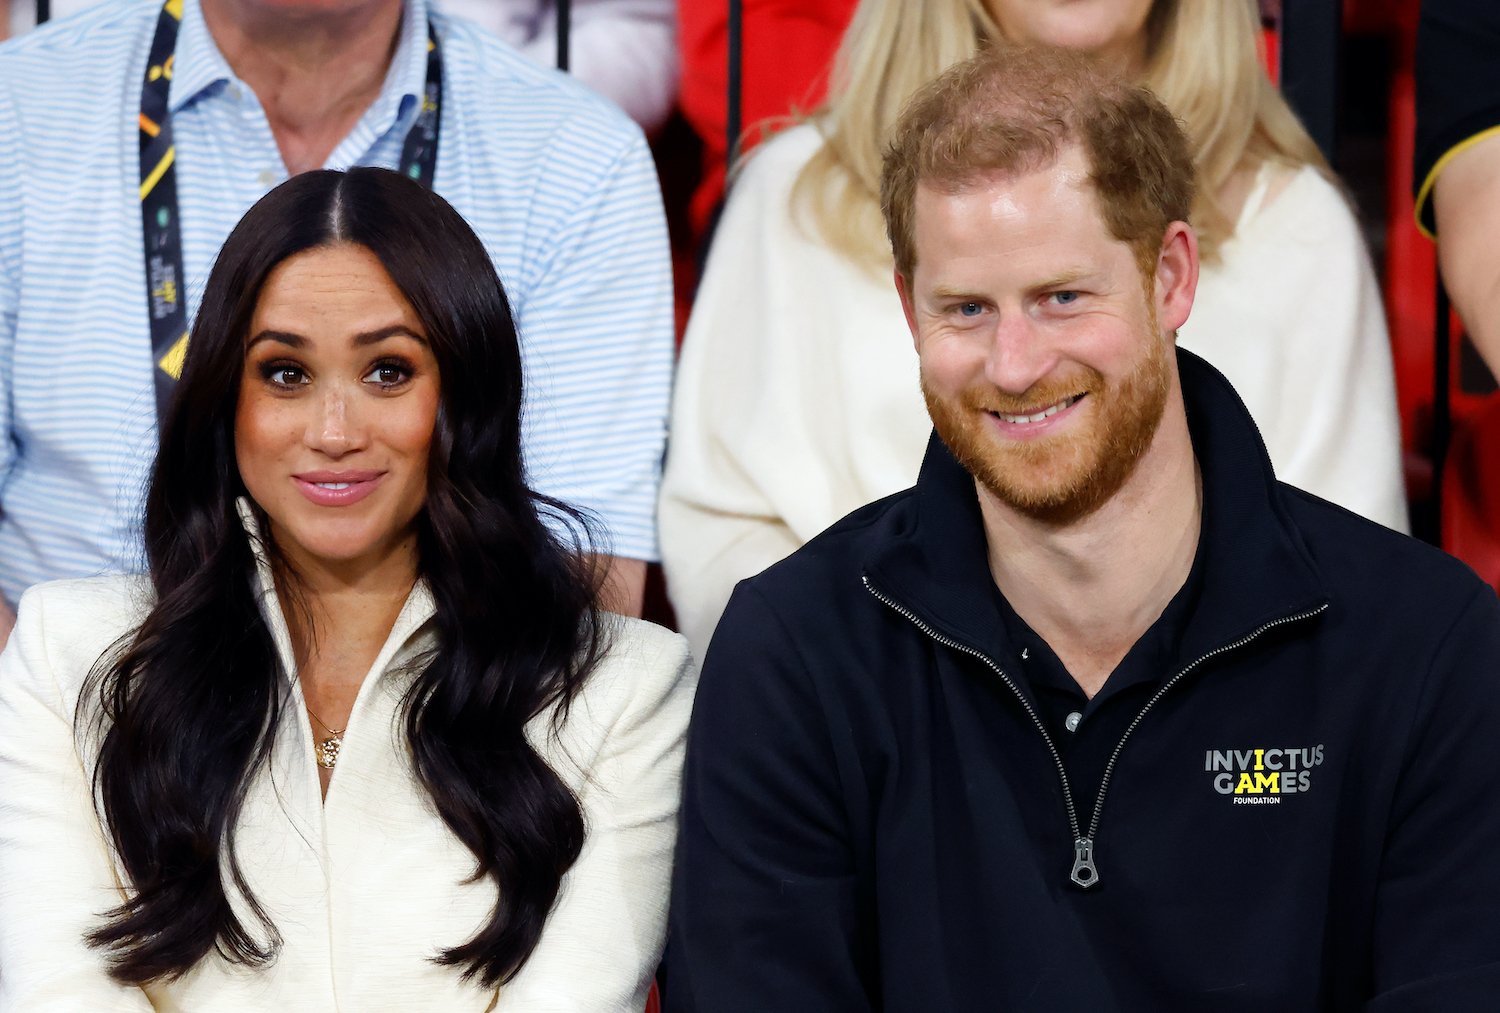 Meghan Markle wears a white top and smiles alongside Prince Harry smiling and wearing a dark half zip pullover at the Invictus Games